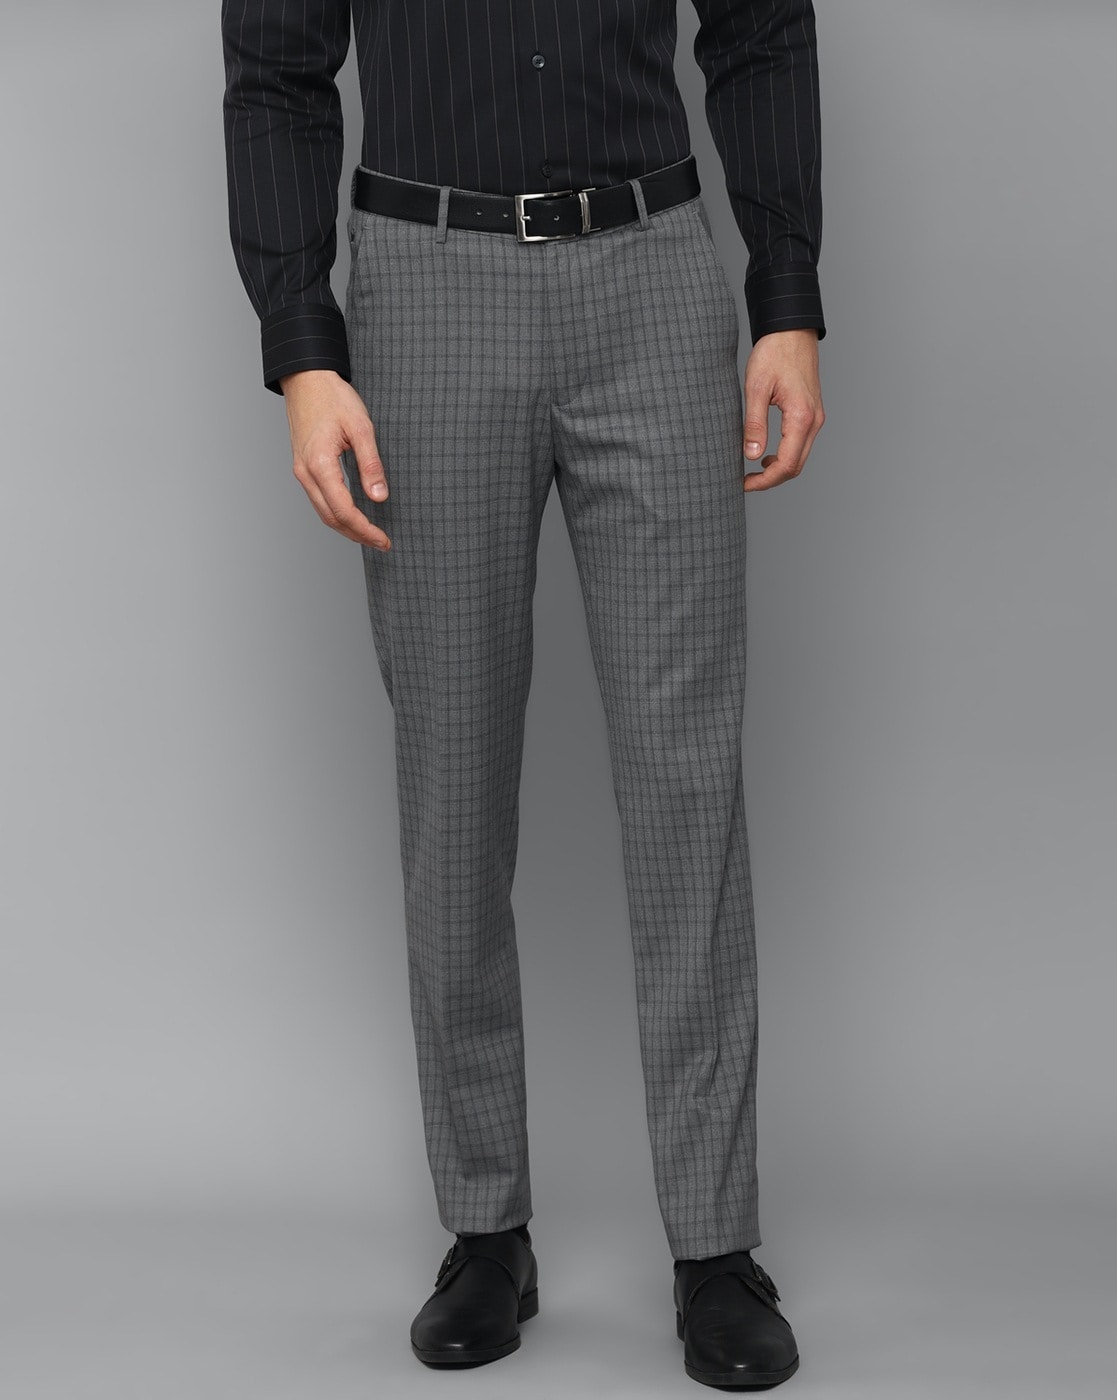 Stylish Polycotton Grey Checked Front Line Formal Trouser For Men